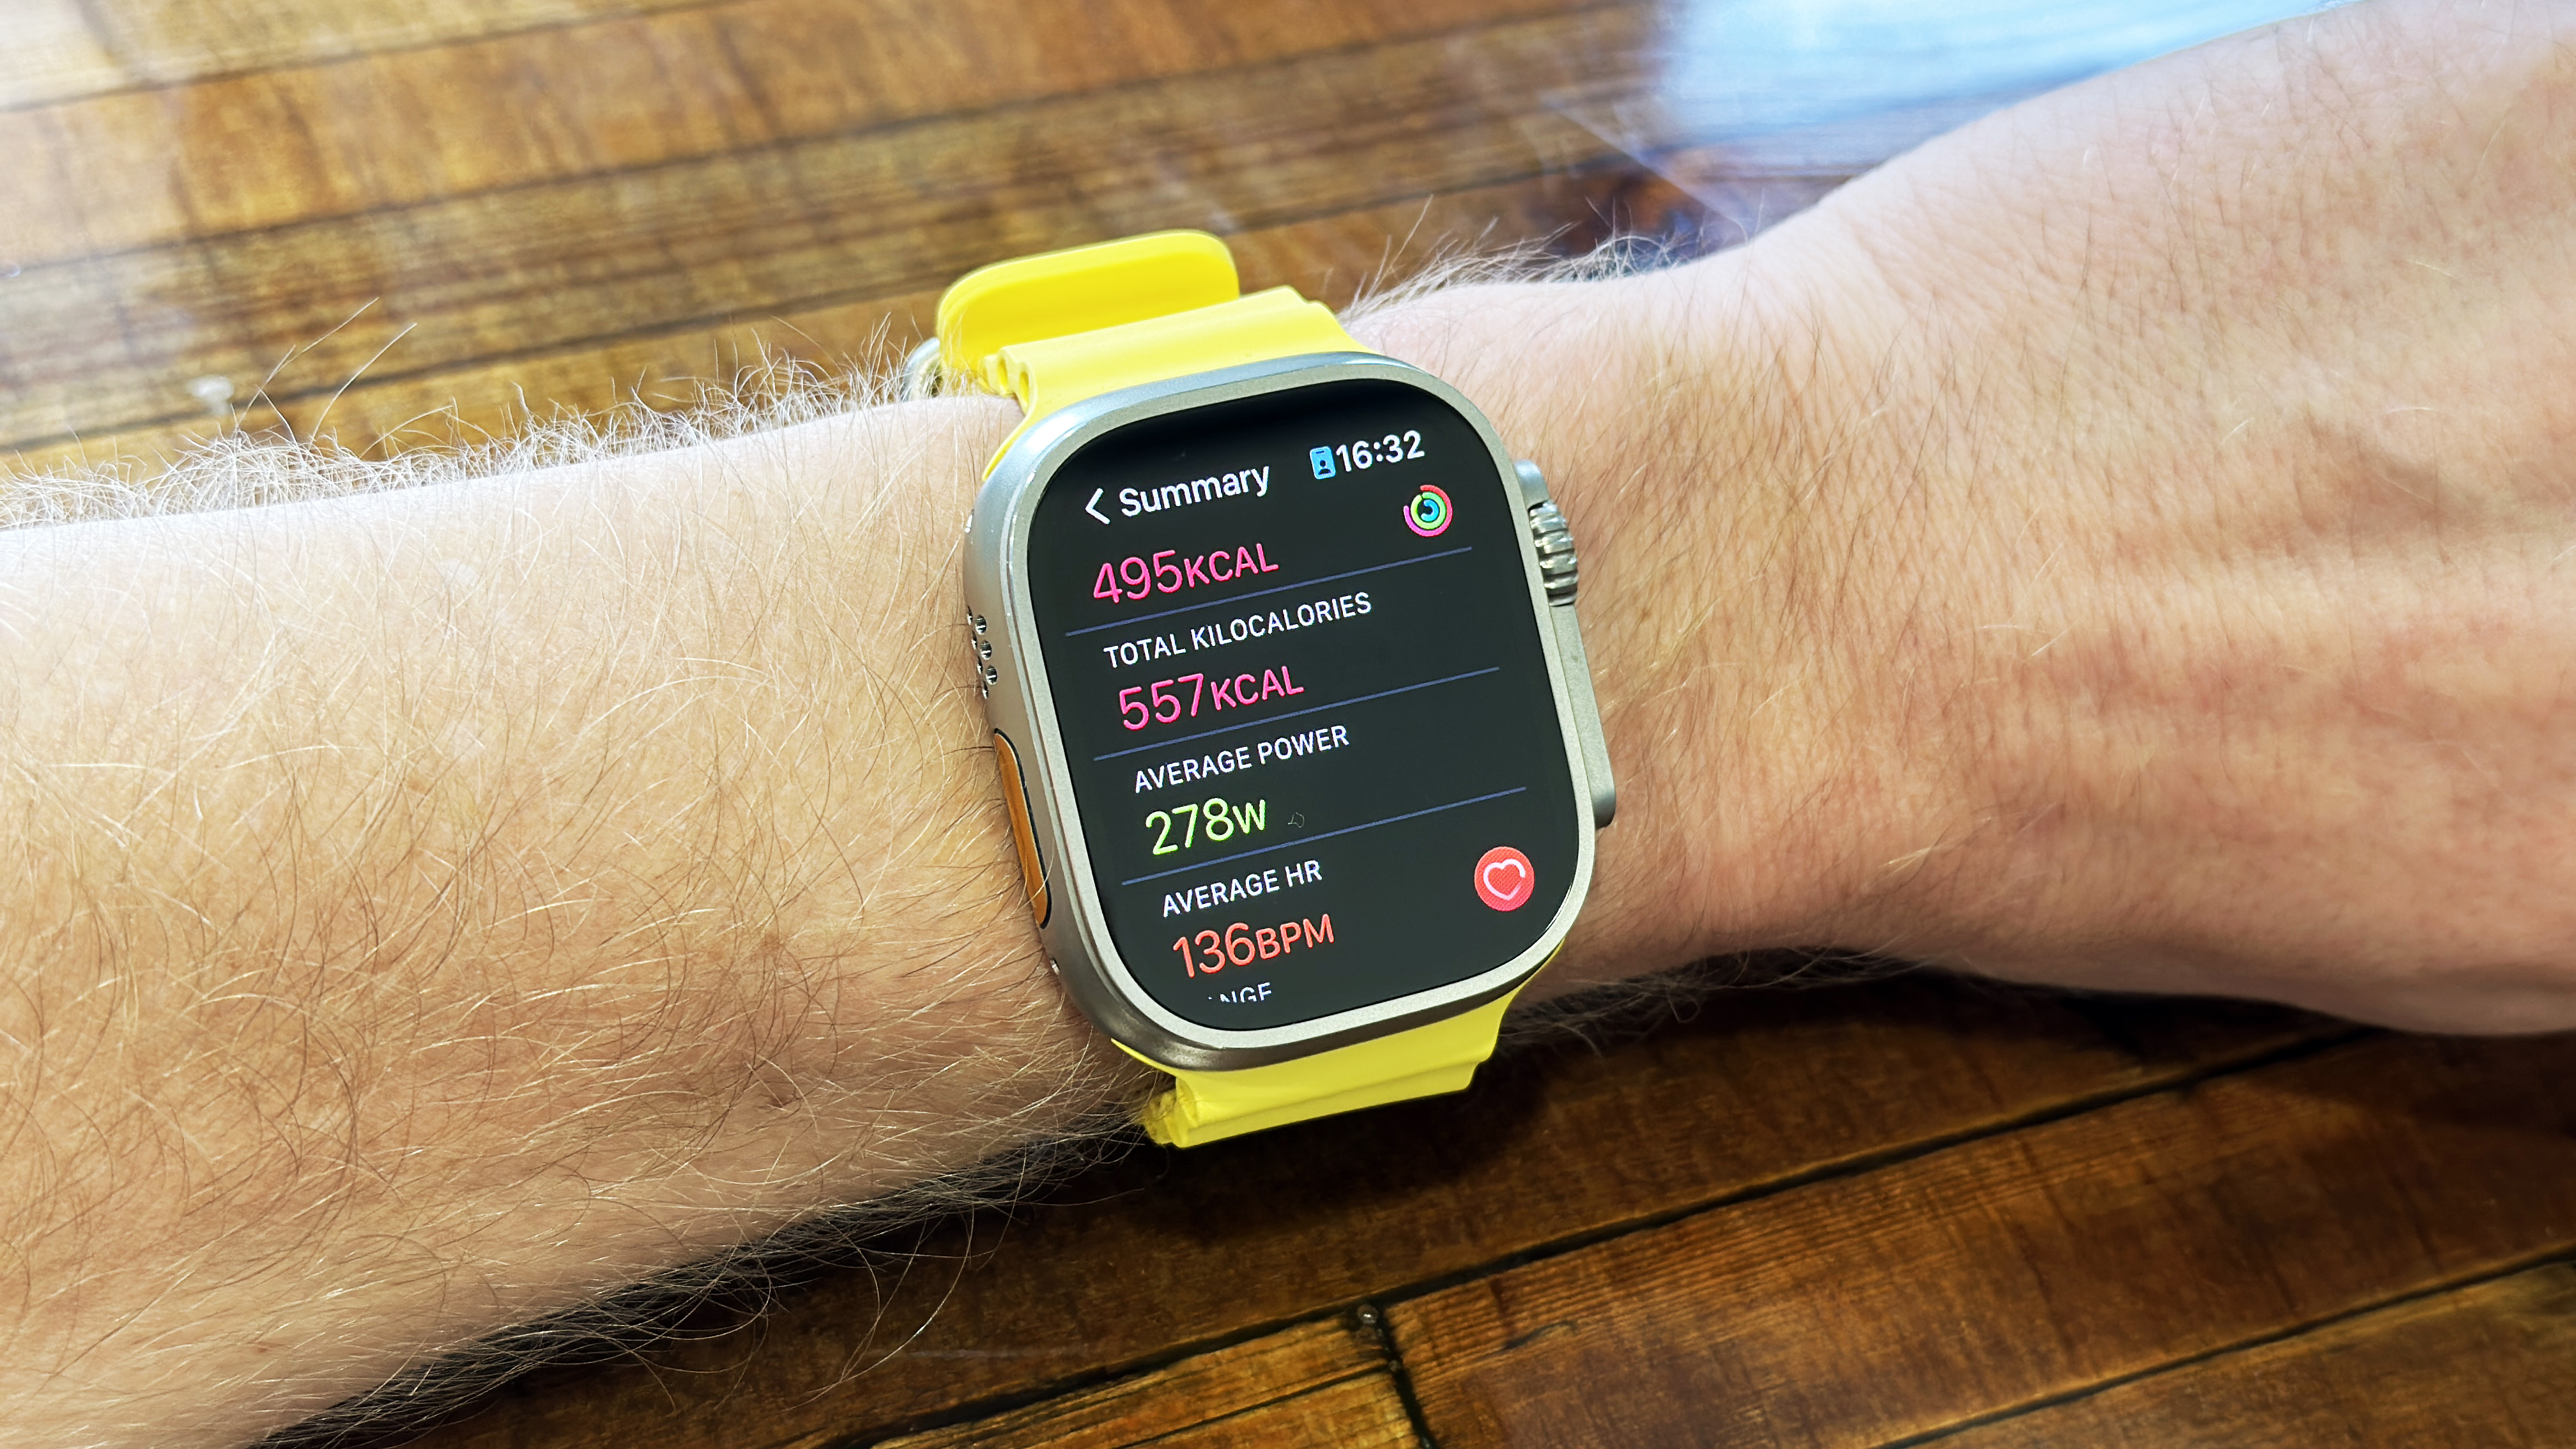 Apple Watch Ultra with yellow strap in use on wrist and on table